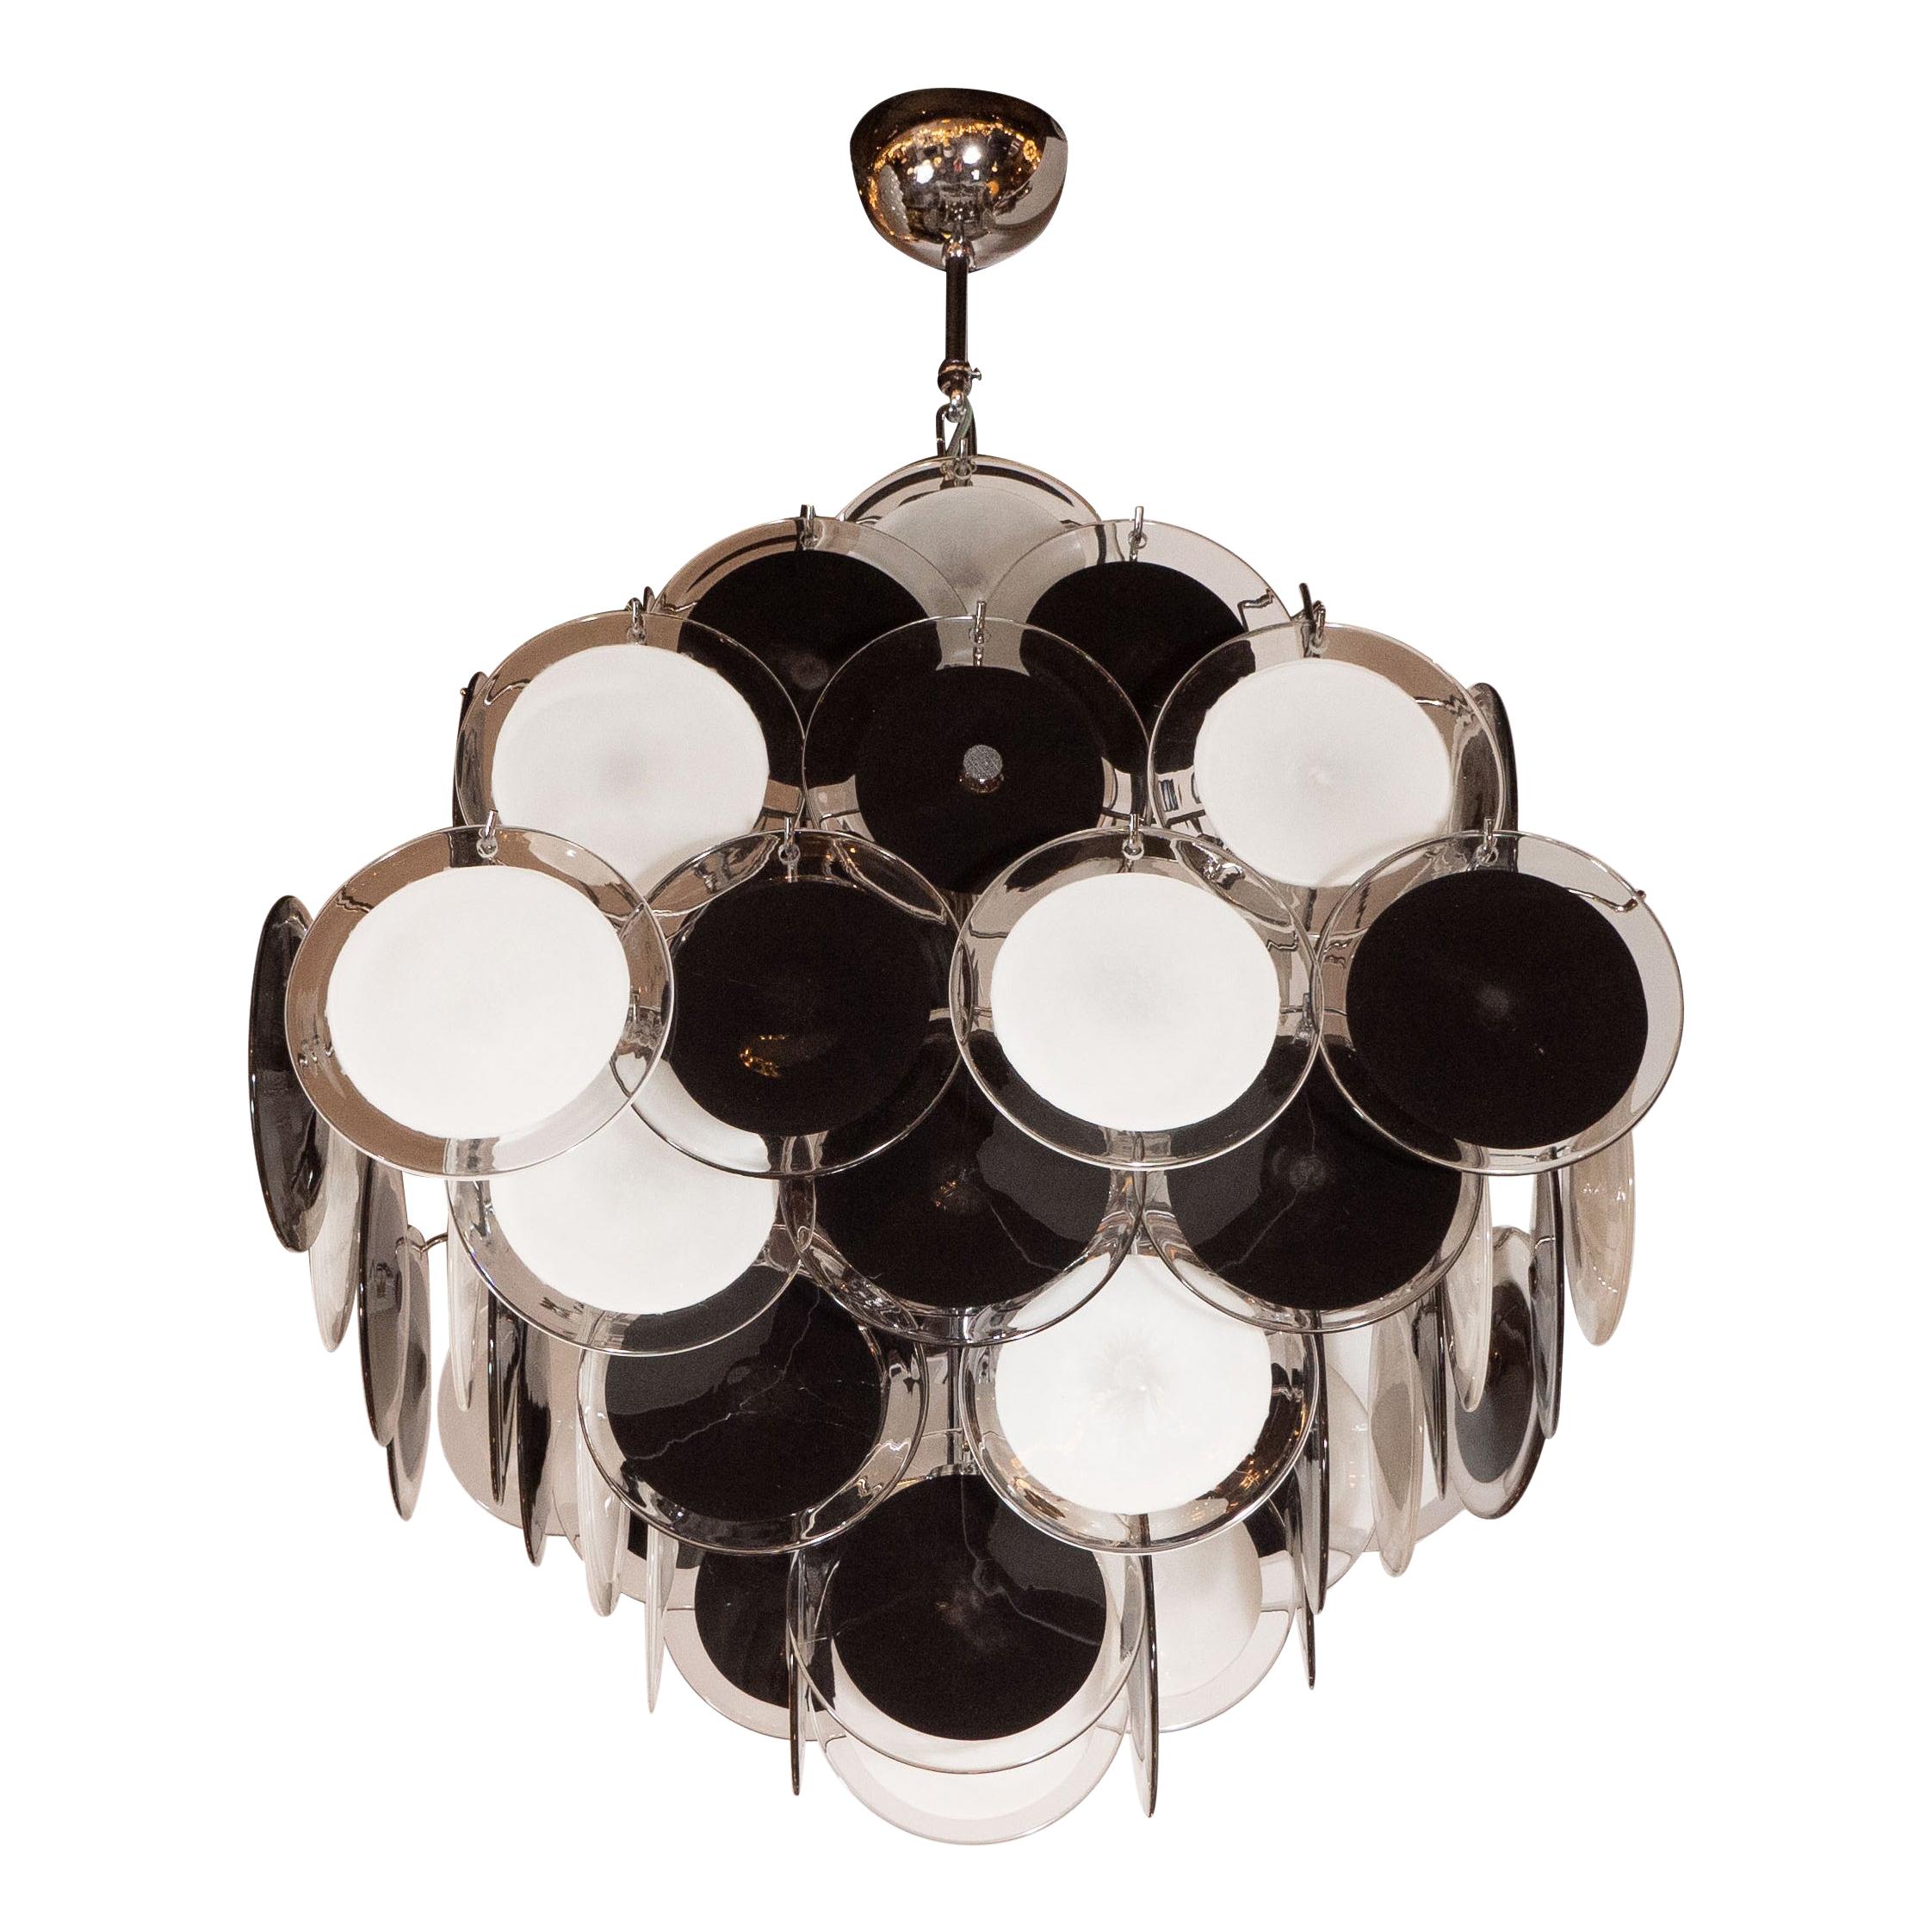 Modernist Pagoda Style Disc Chandelier in Handblown Murano Black and White Glass